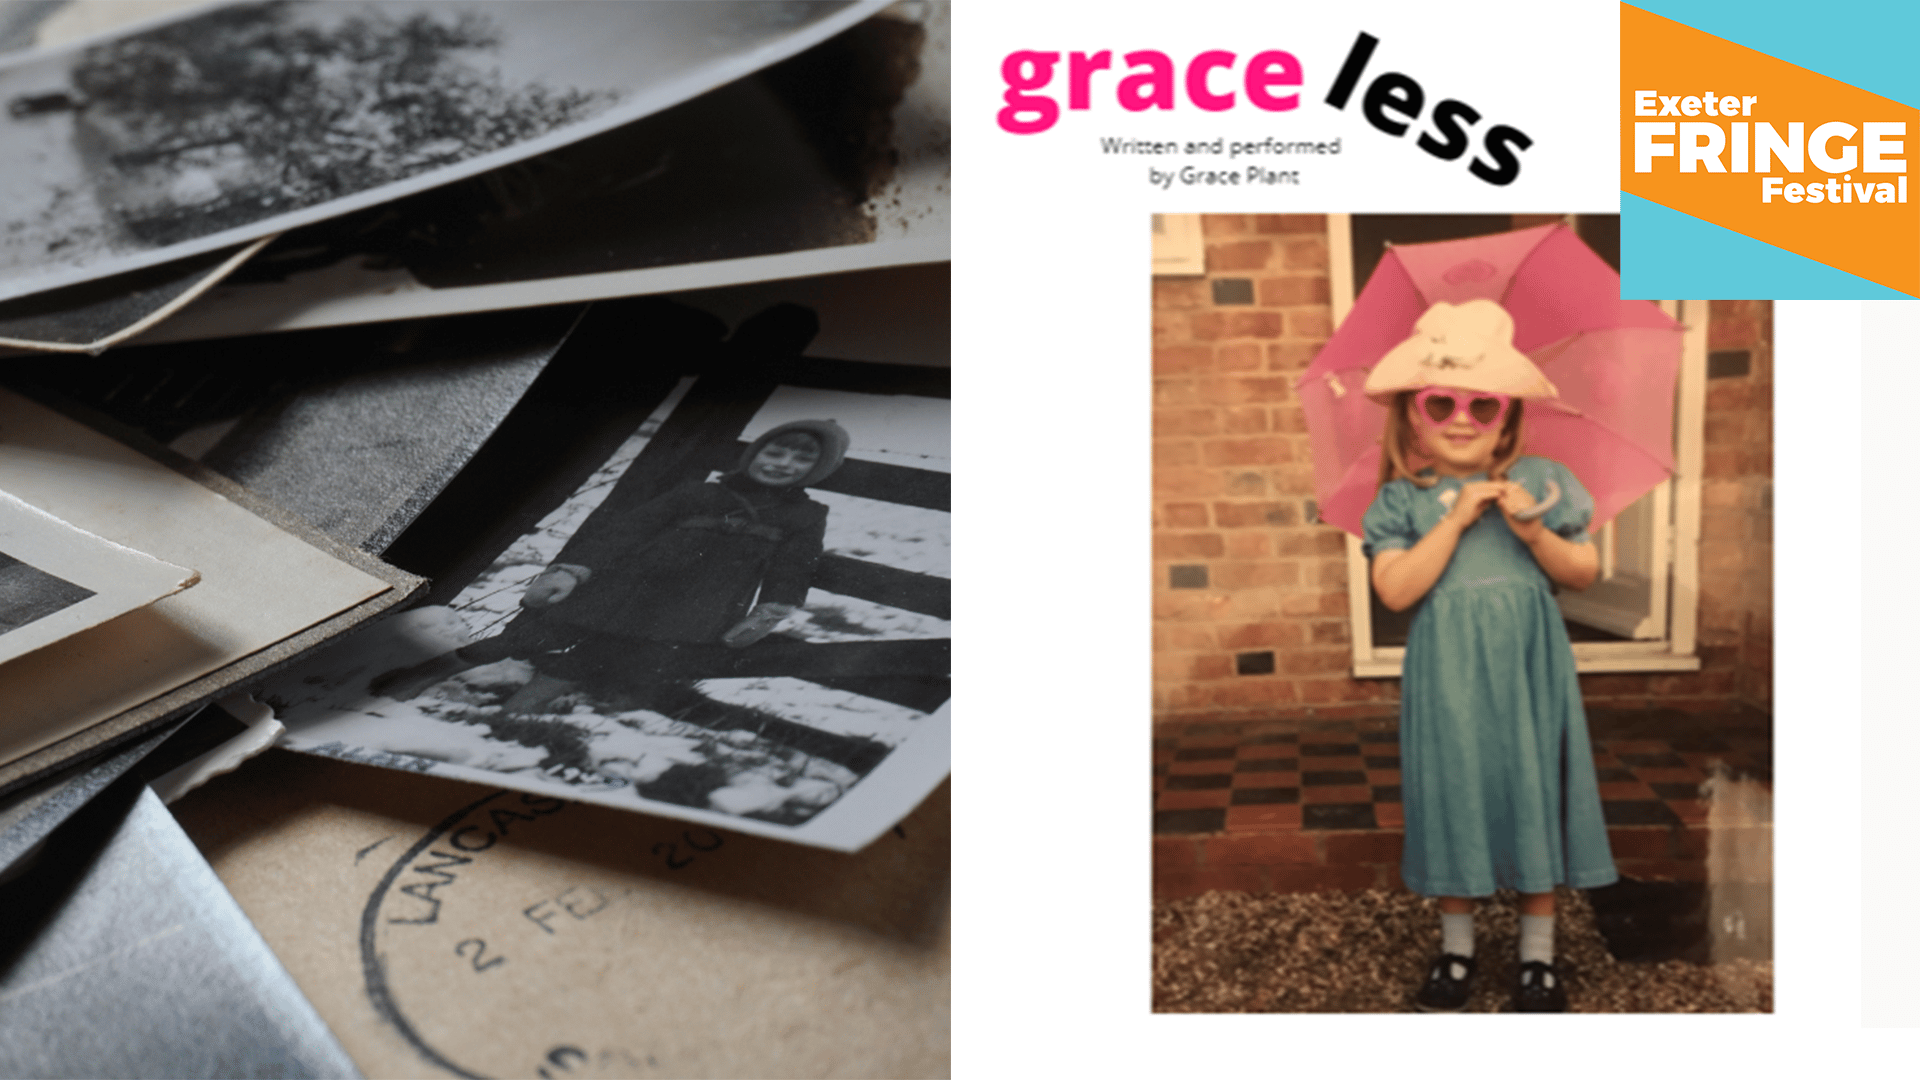 Promotional image for Graceless - old looking photos of a young Grace; a smiling girl with a pink umbrella and pink heart-shaped glasses